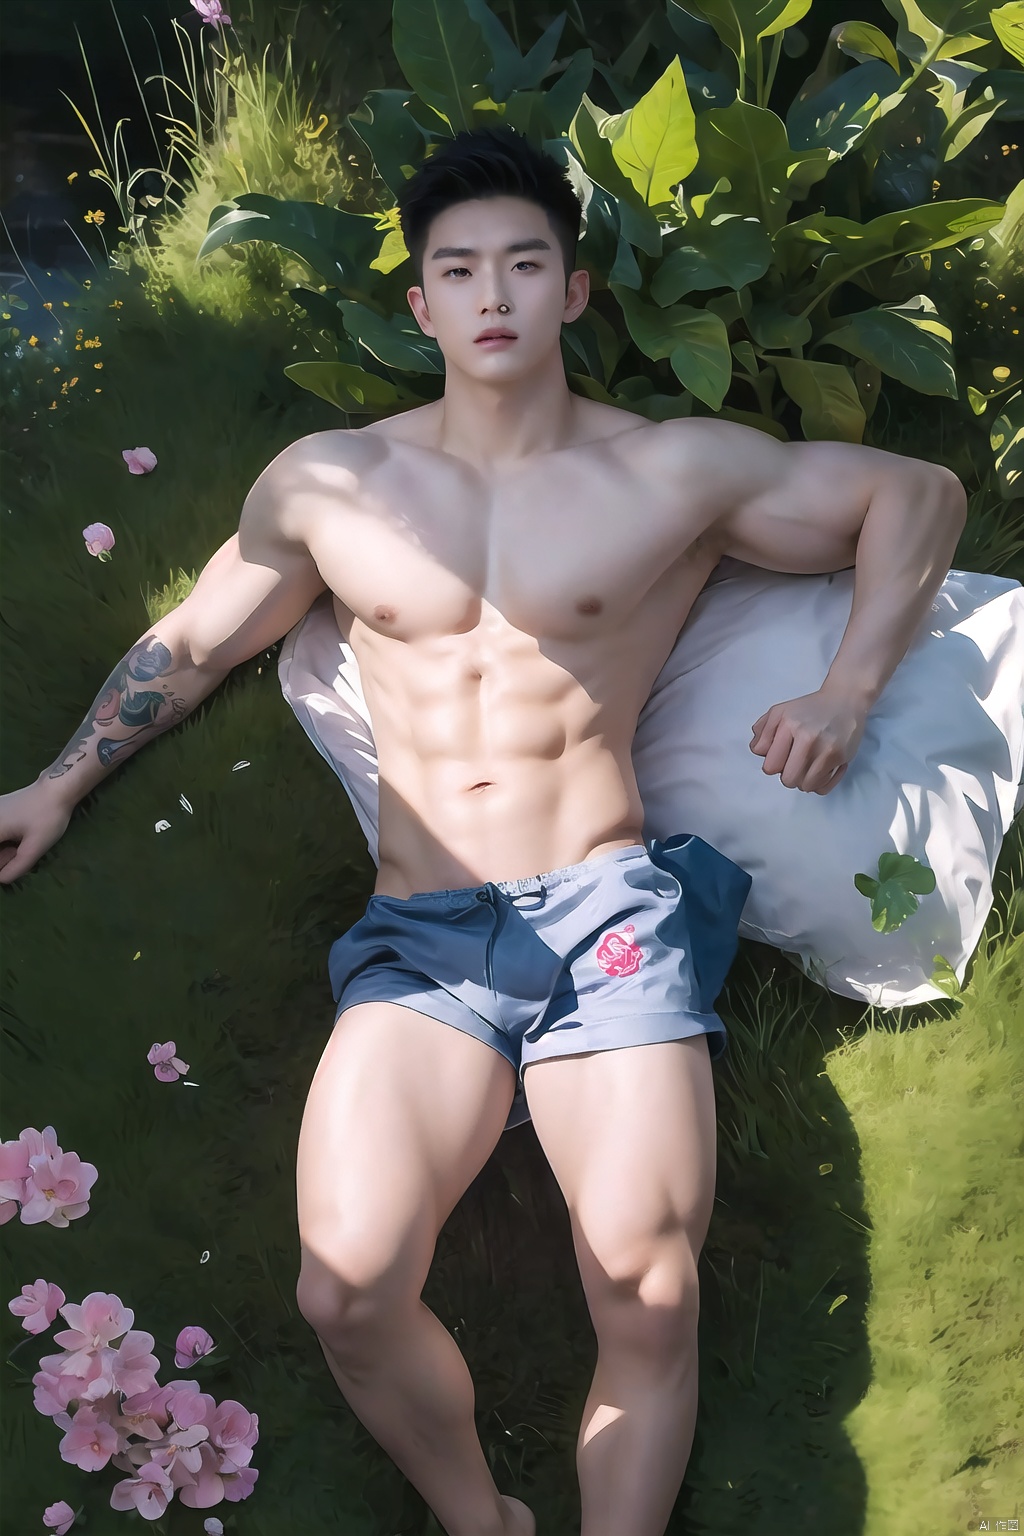  Real Film Photos, close_up Shooting, Professional Photography, Skin, Tattoos, 1 Chinese Boy, ((Full Body Photo))), Handsome, 23 Years Old Fit Figure, High Quality, Masterpiece, ((Realistic)), Big Muscles, Sun, Oil Green Plants, Colorful Flowers Around, Light and Shadow Effects, Lots of Details, Spring Theme